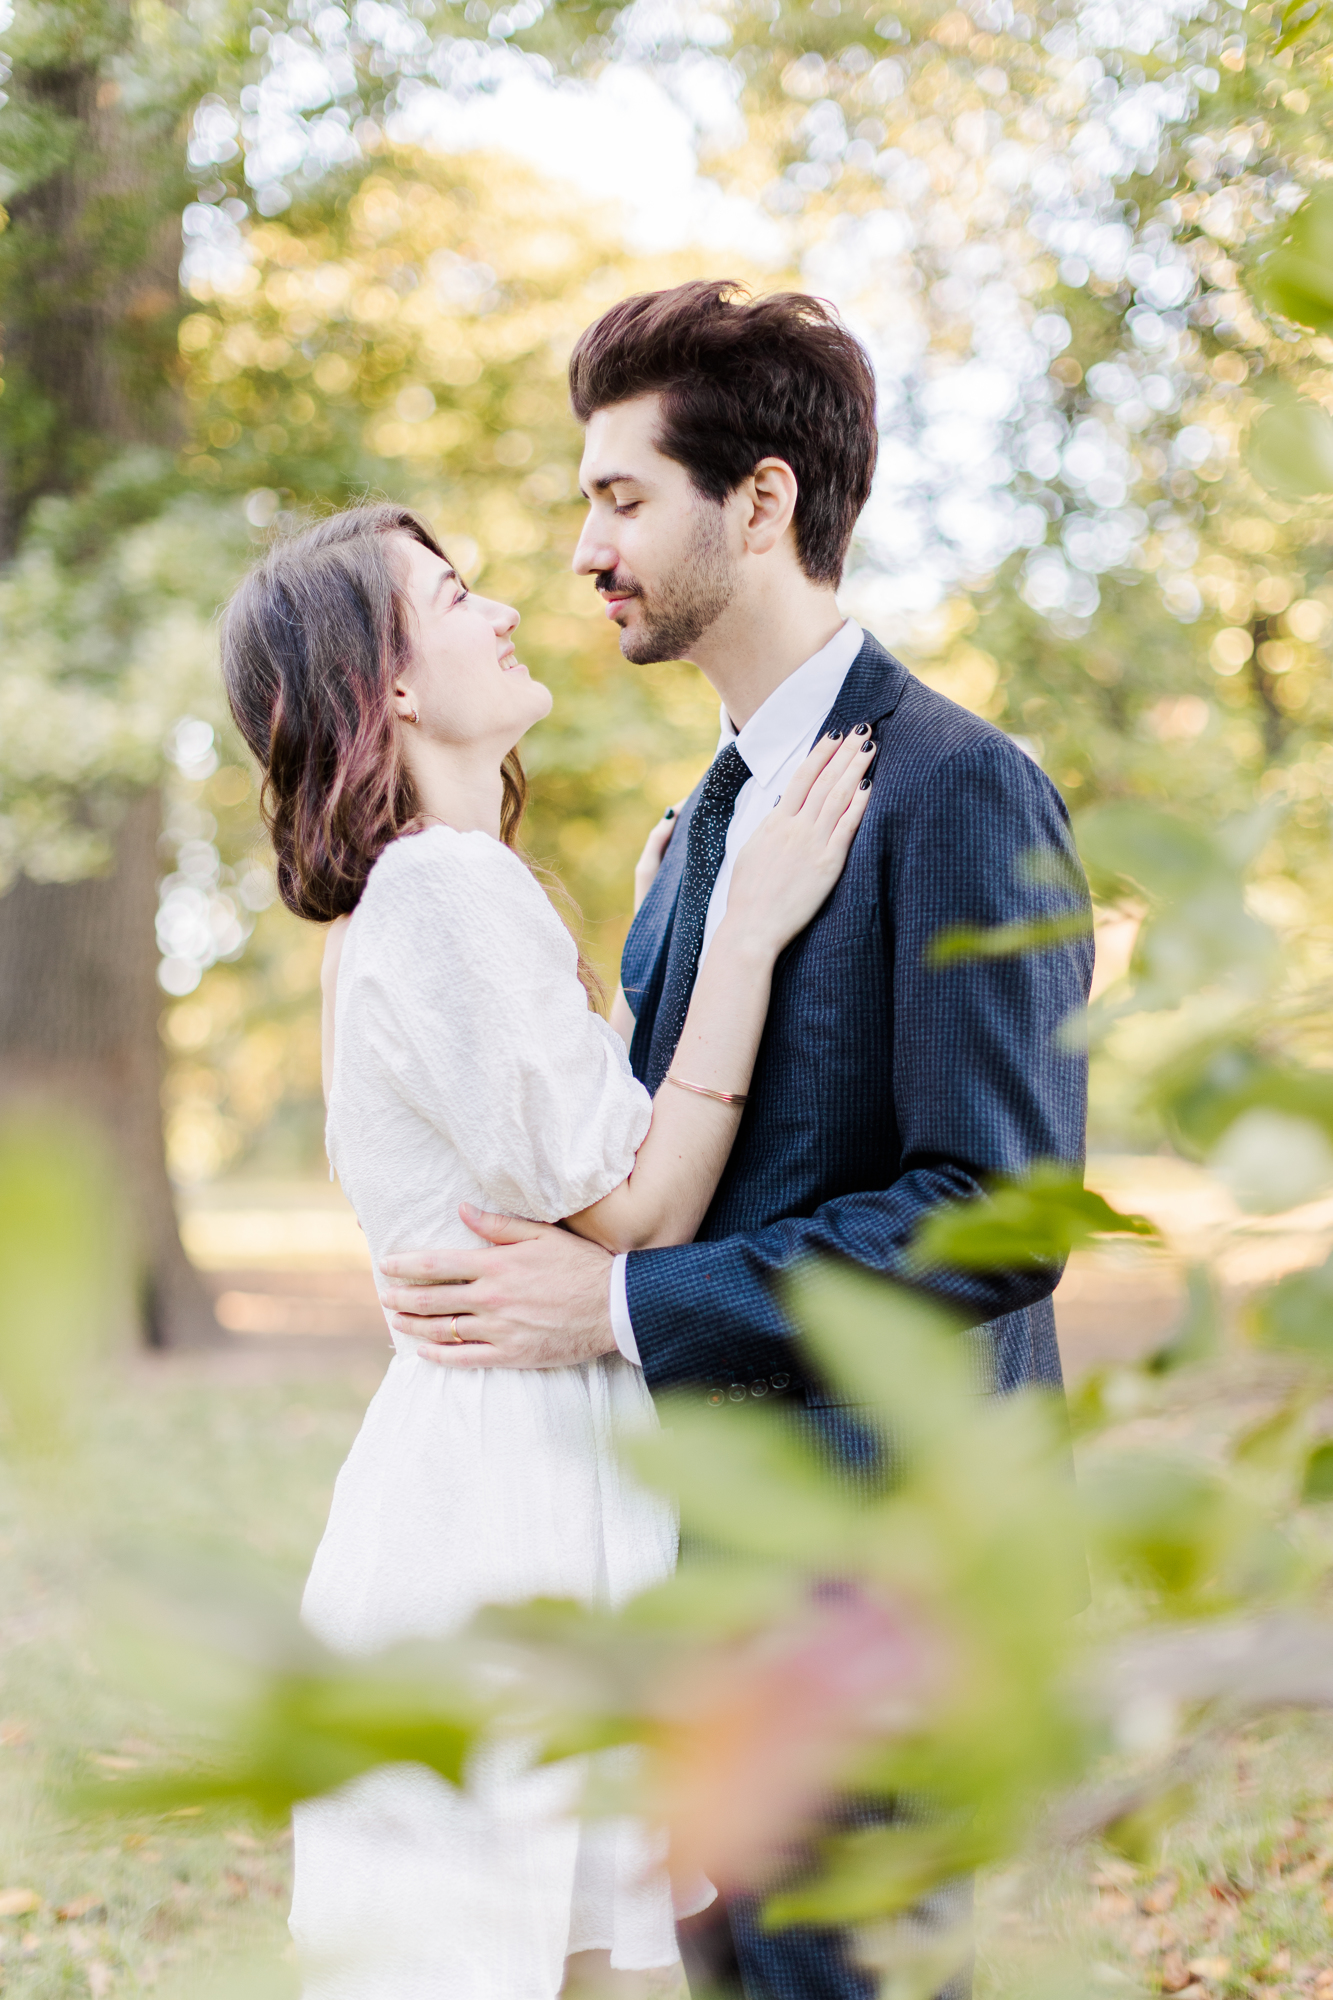 Beautiful Central Park Engagement Photos in NYC